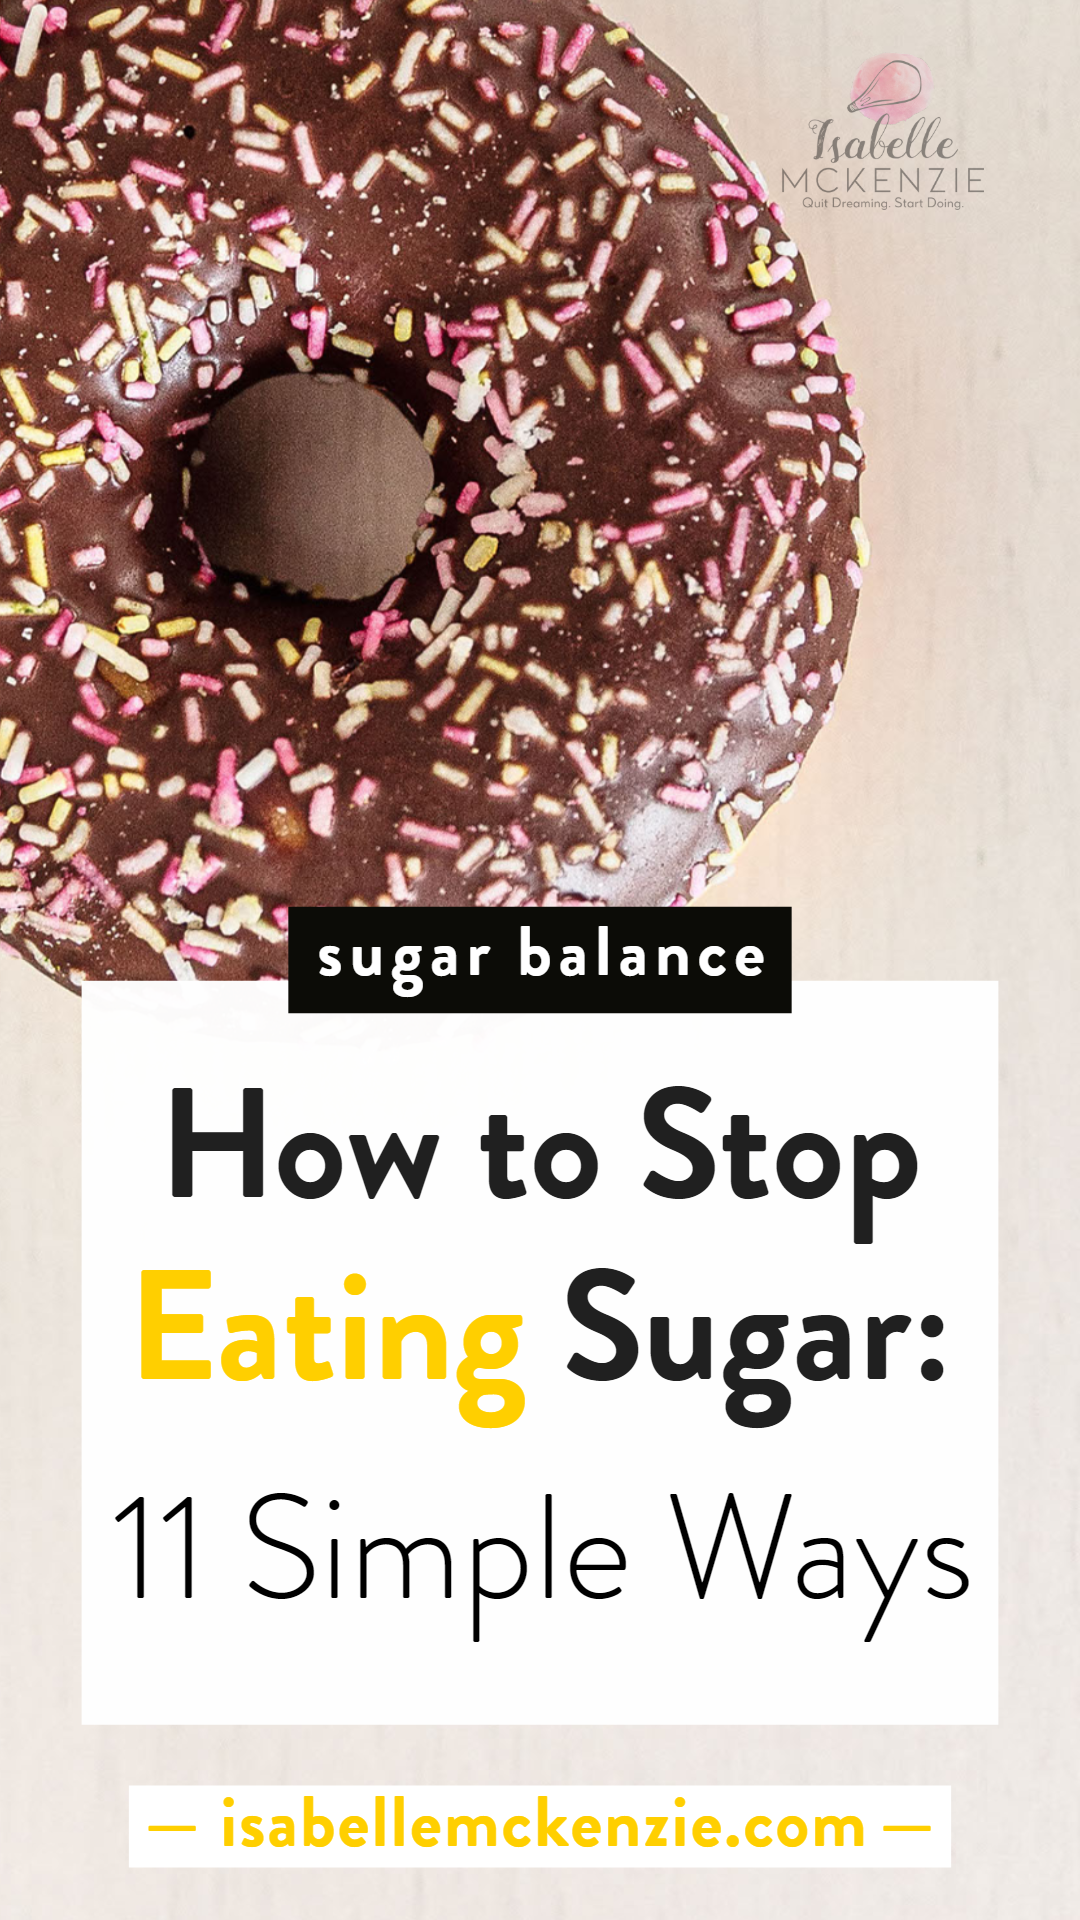 How to Stop Eating Sugar: 11 Simple Ways